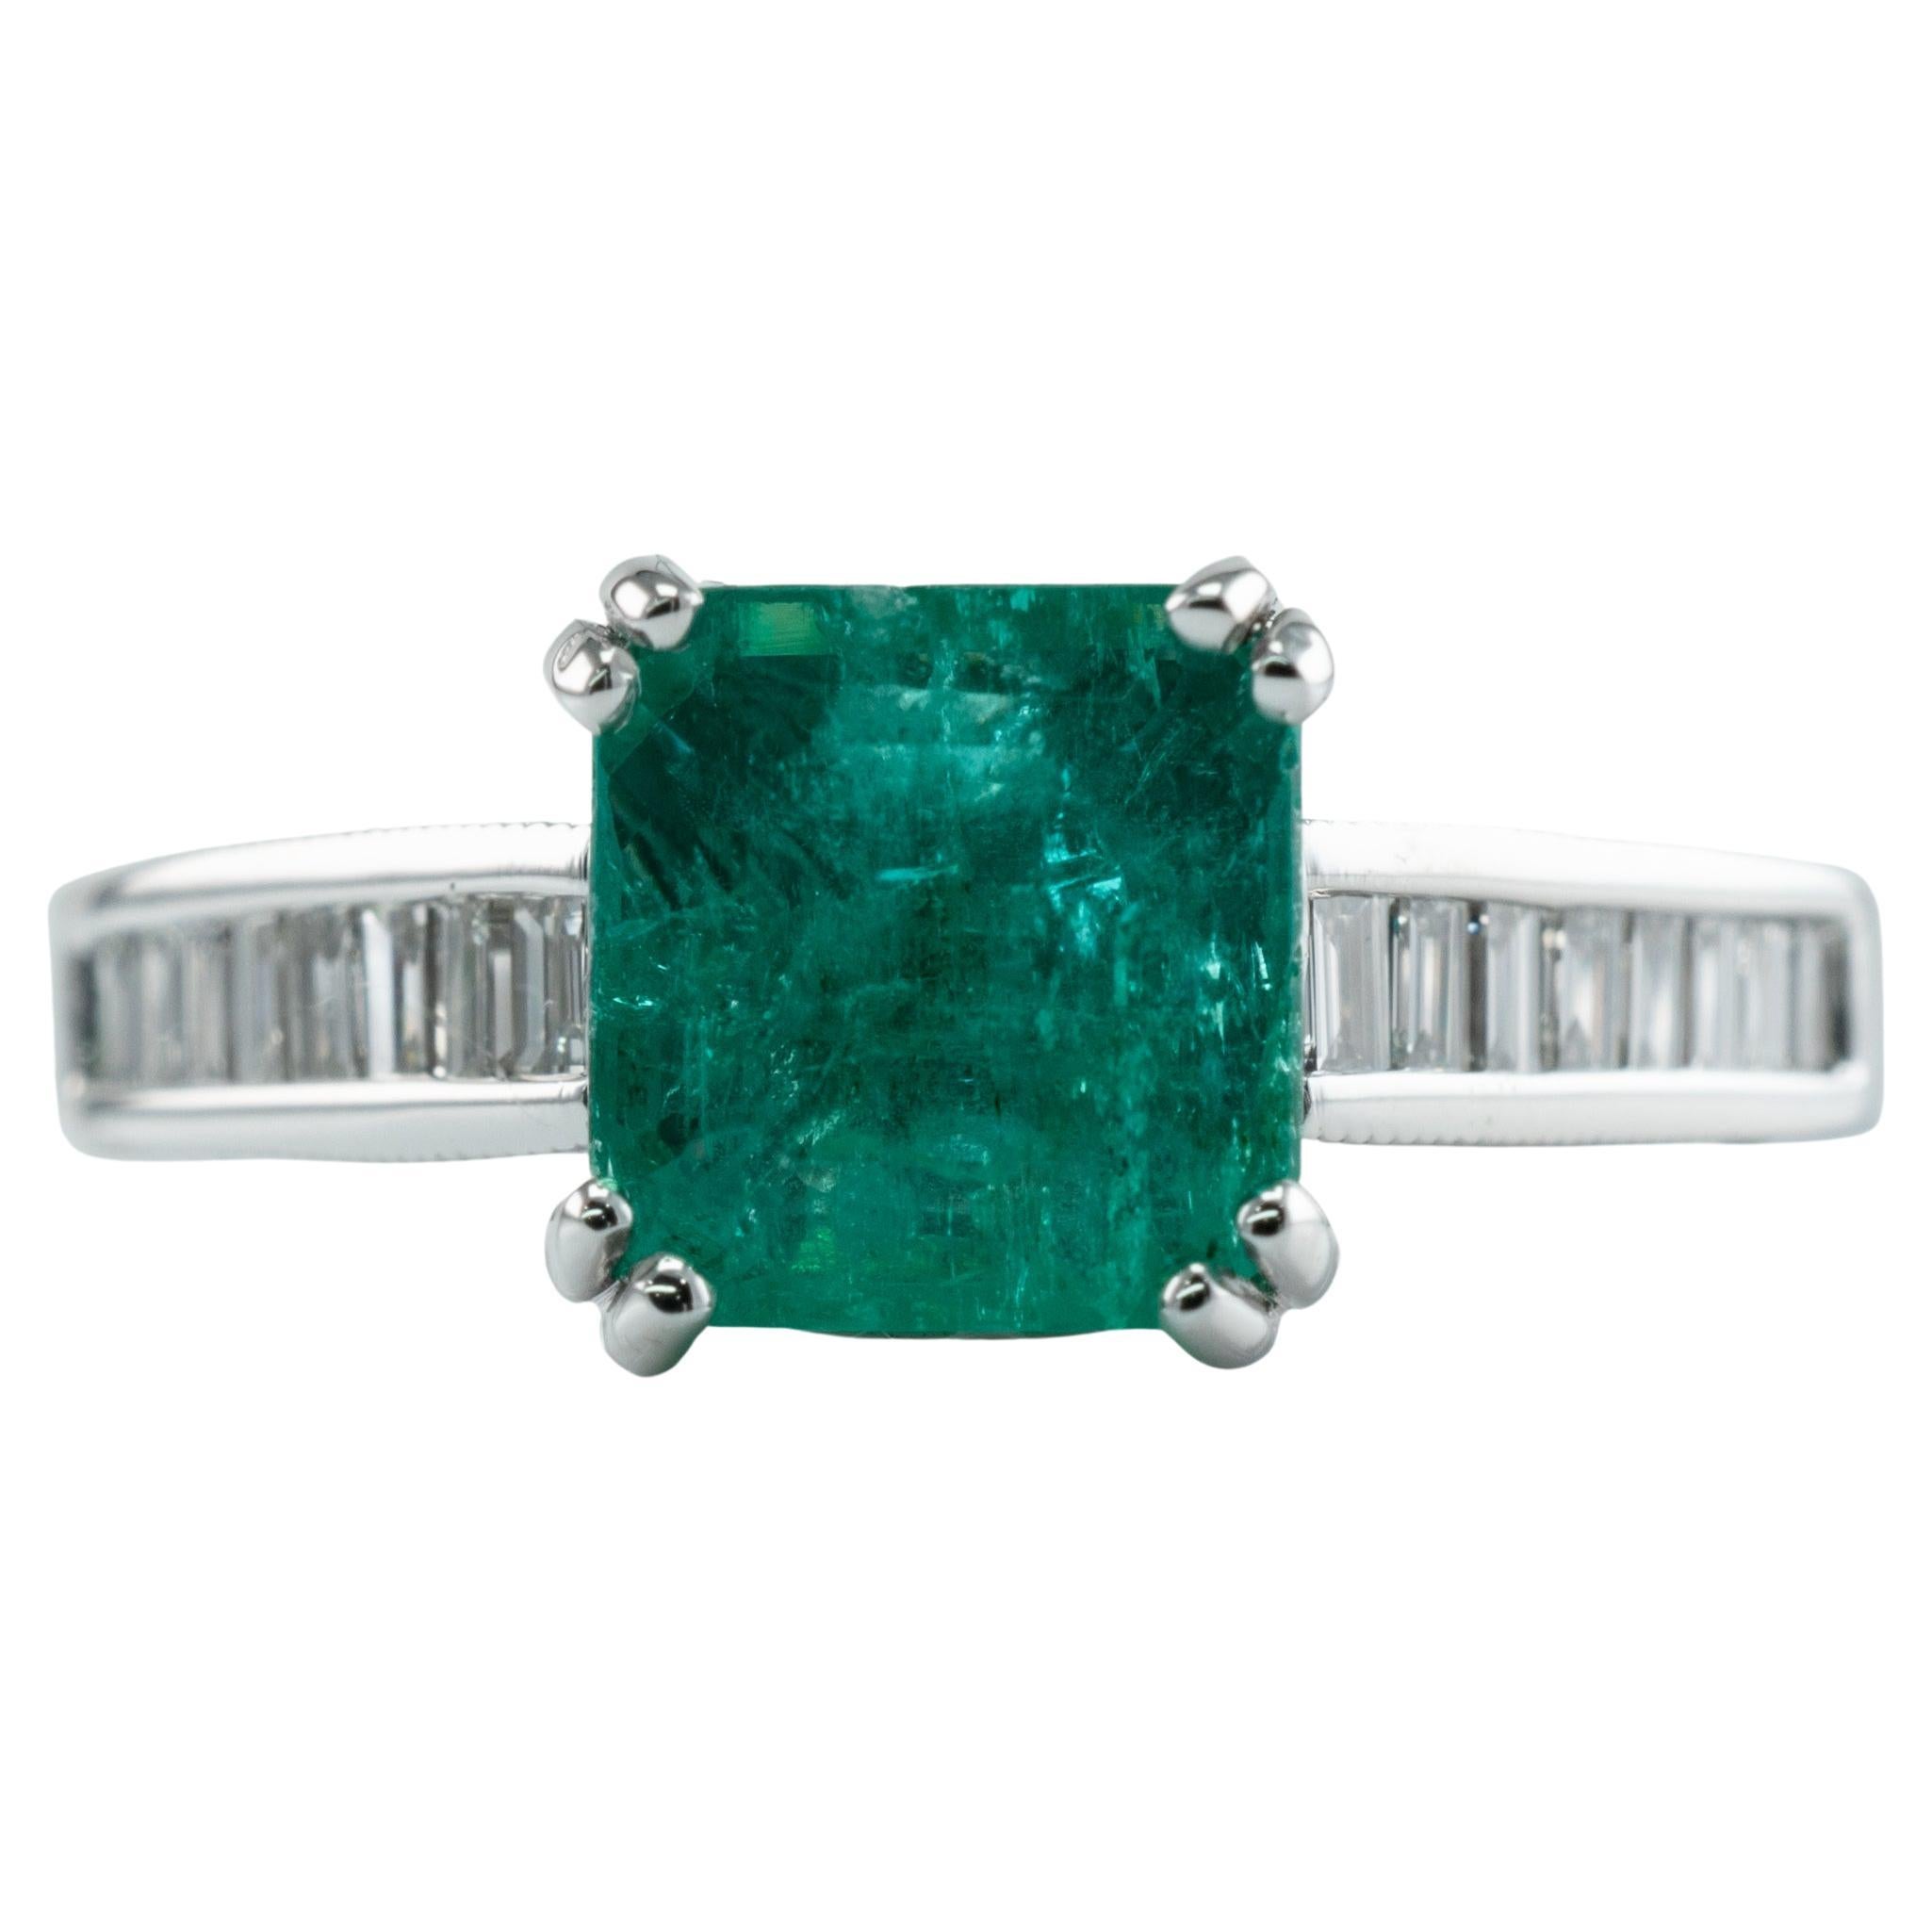 Square Princess Diamond Colombian Emerald Ring 14K White Gold Band Engagement